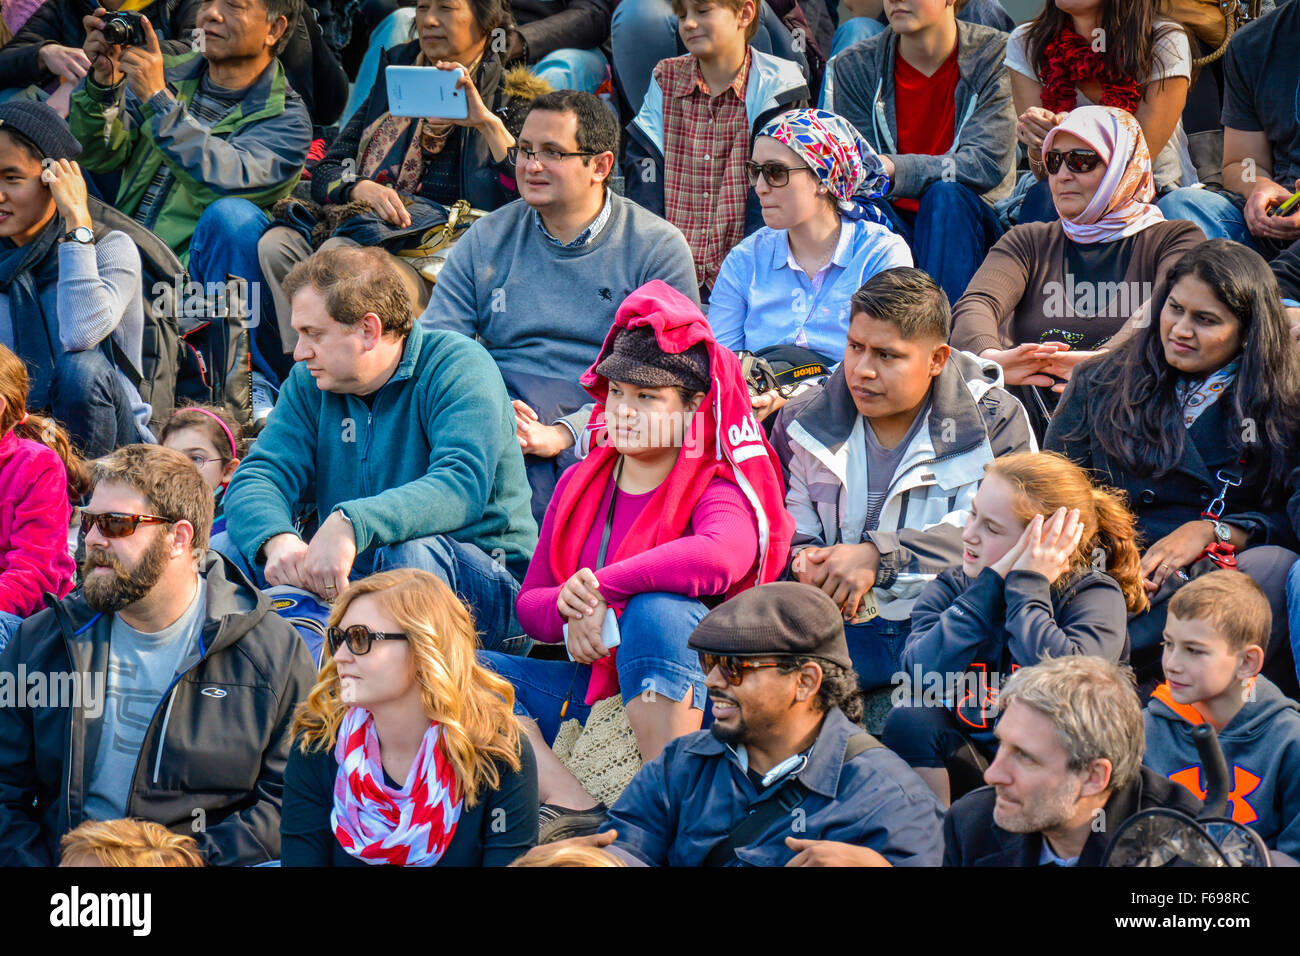 A large, diverse group of people sitting outside in rows as an audience watching a live performance and responding cheerfully Stock Photo